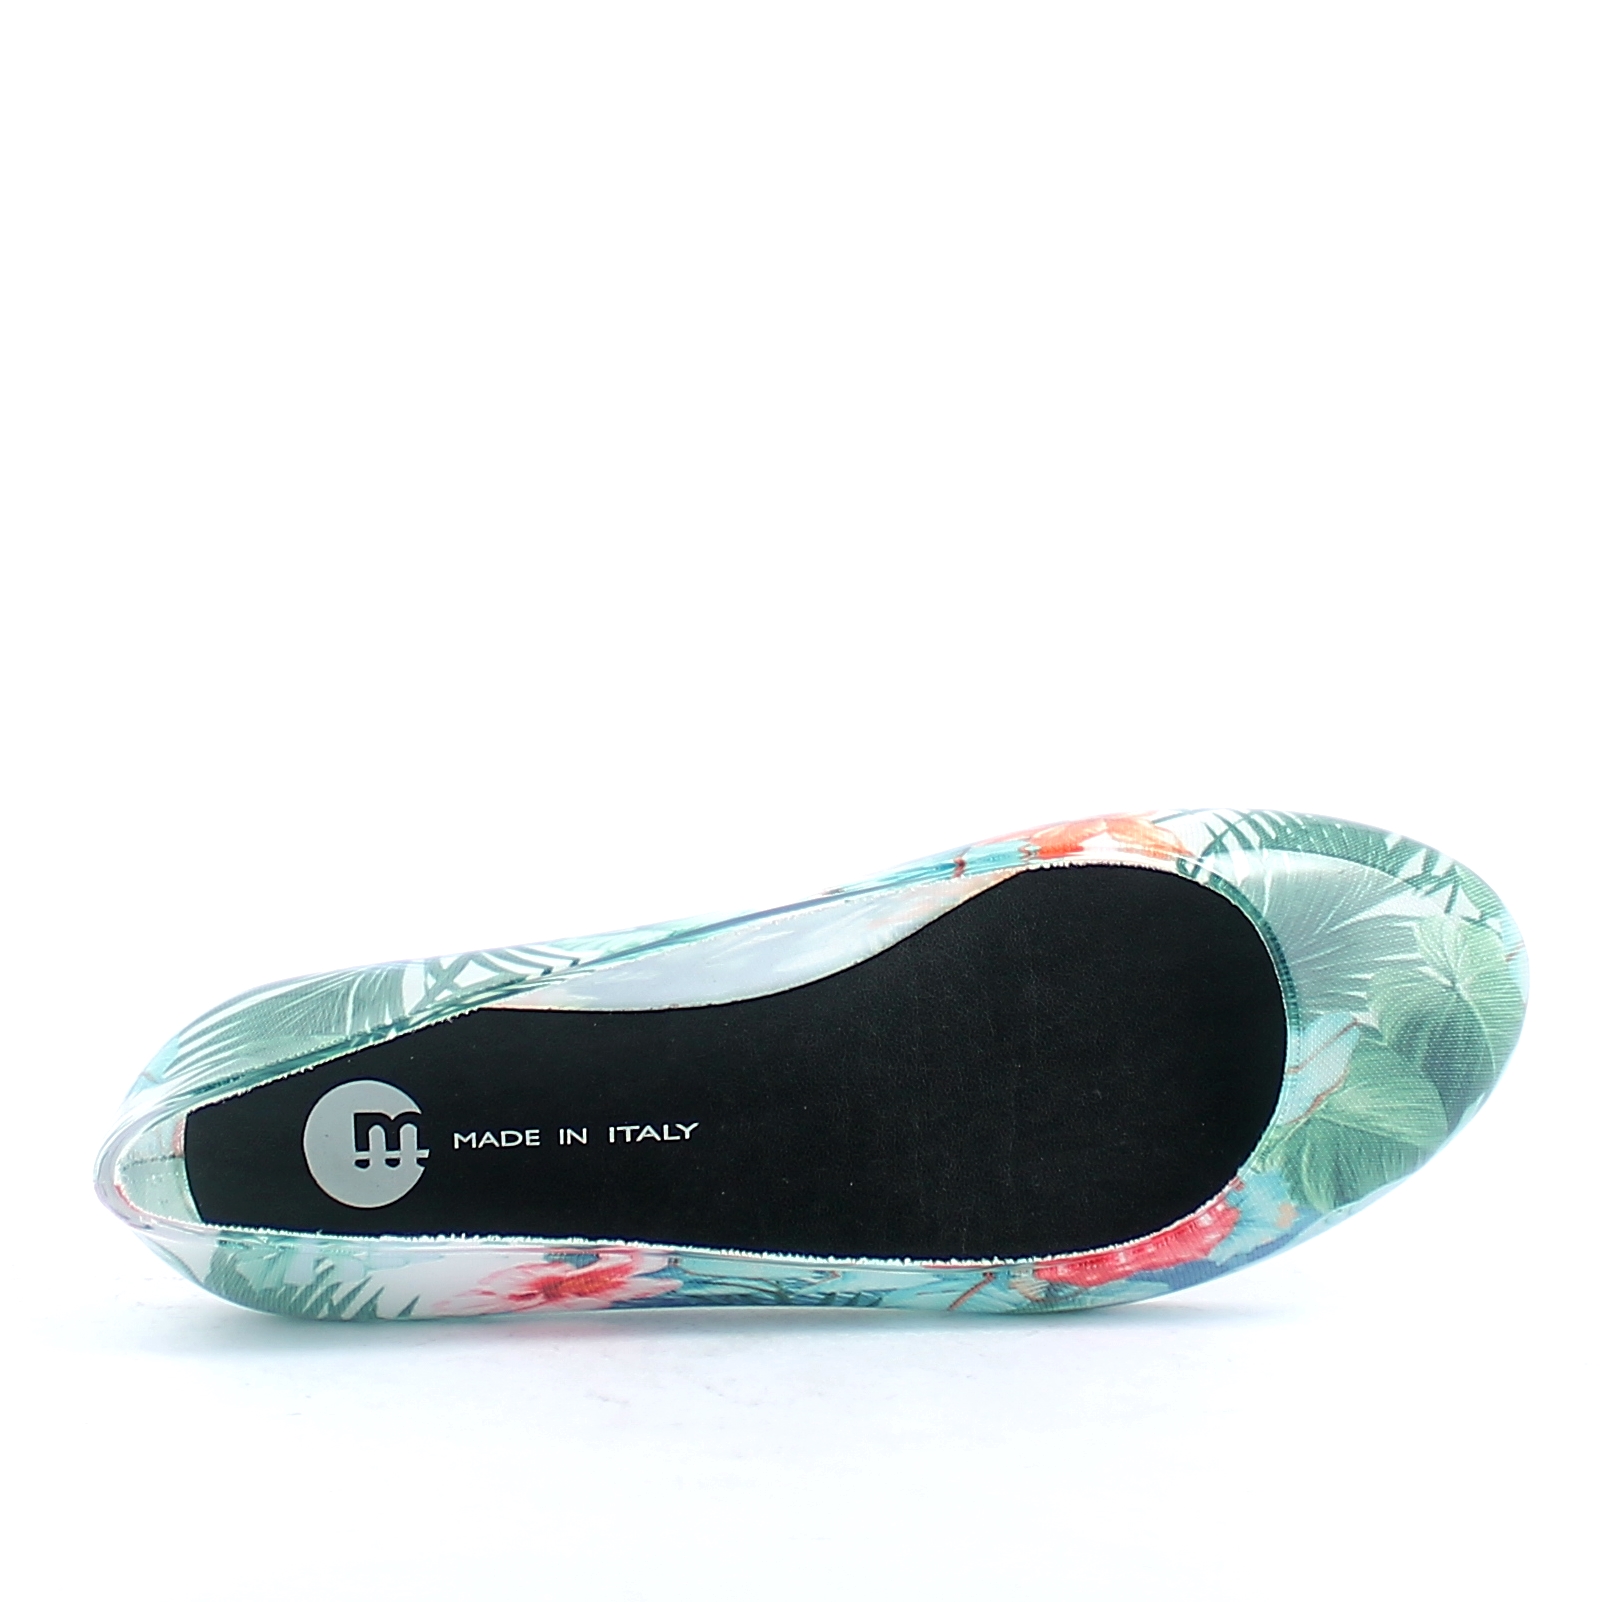 Insole made of padded leatherette with one colour pad printed logo 